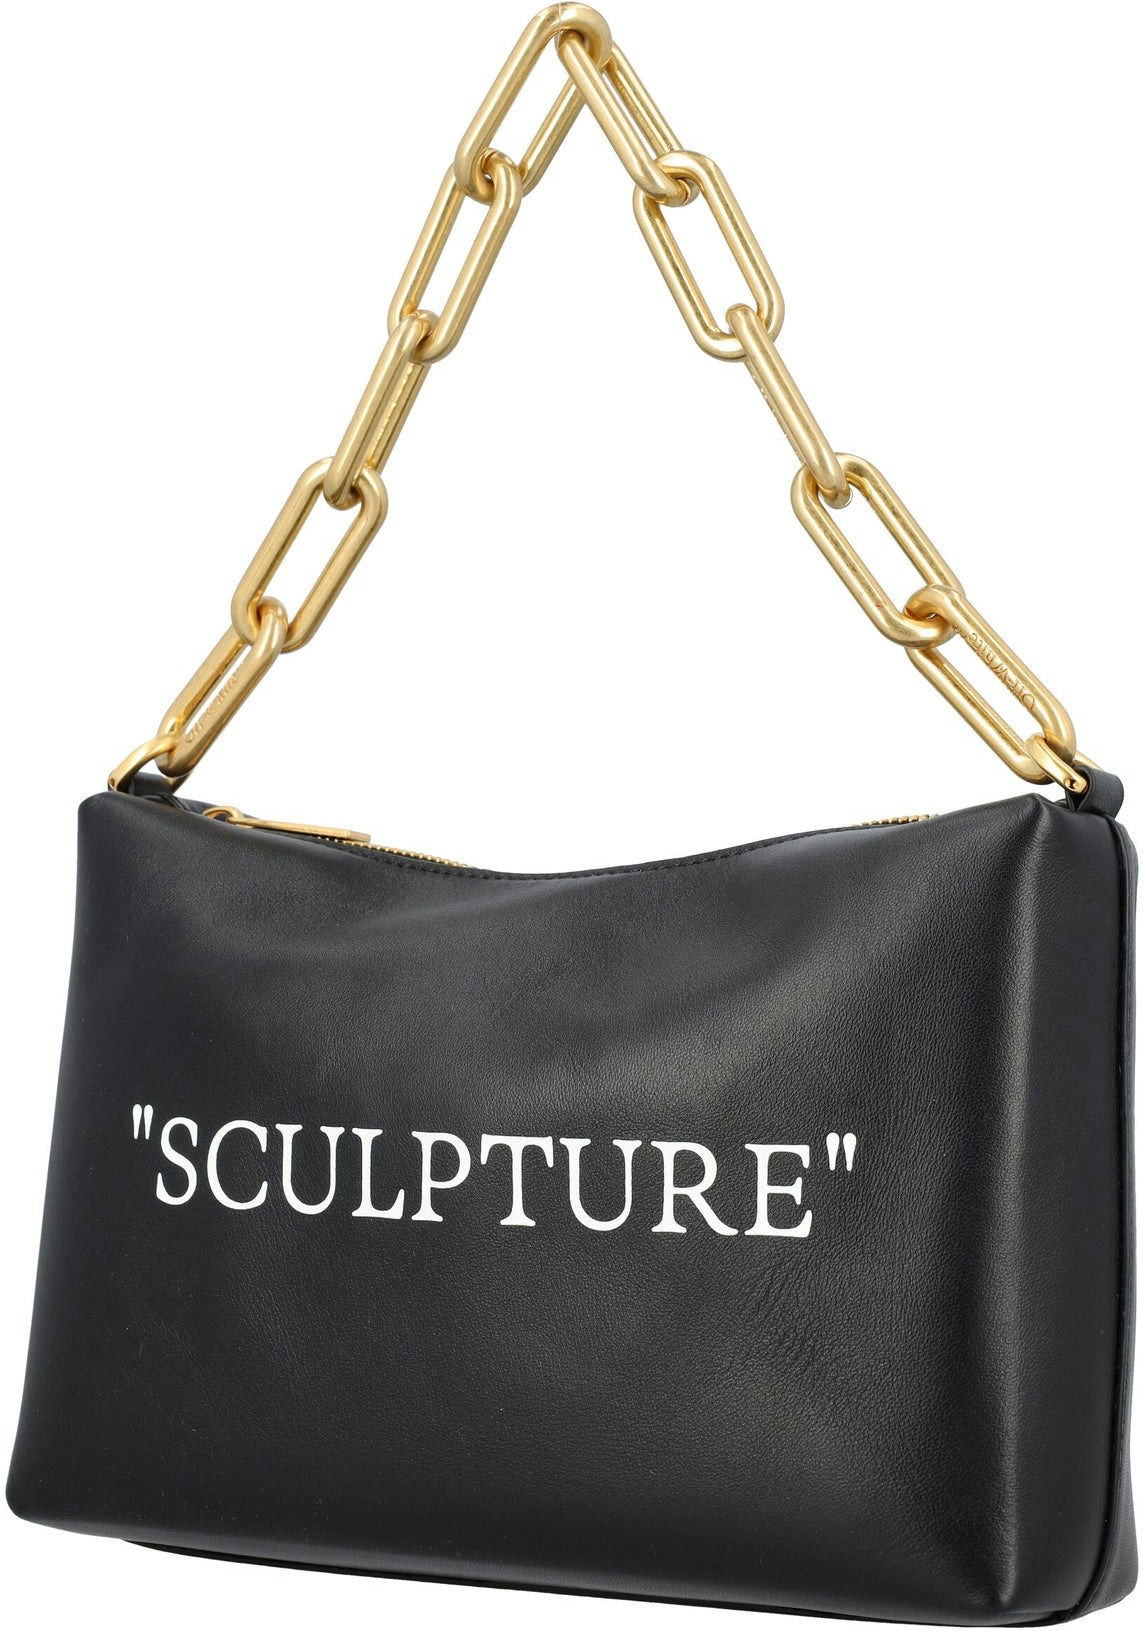 Off-White Block Pouch Quote Leather Handbag